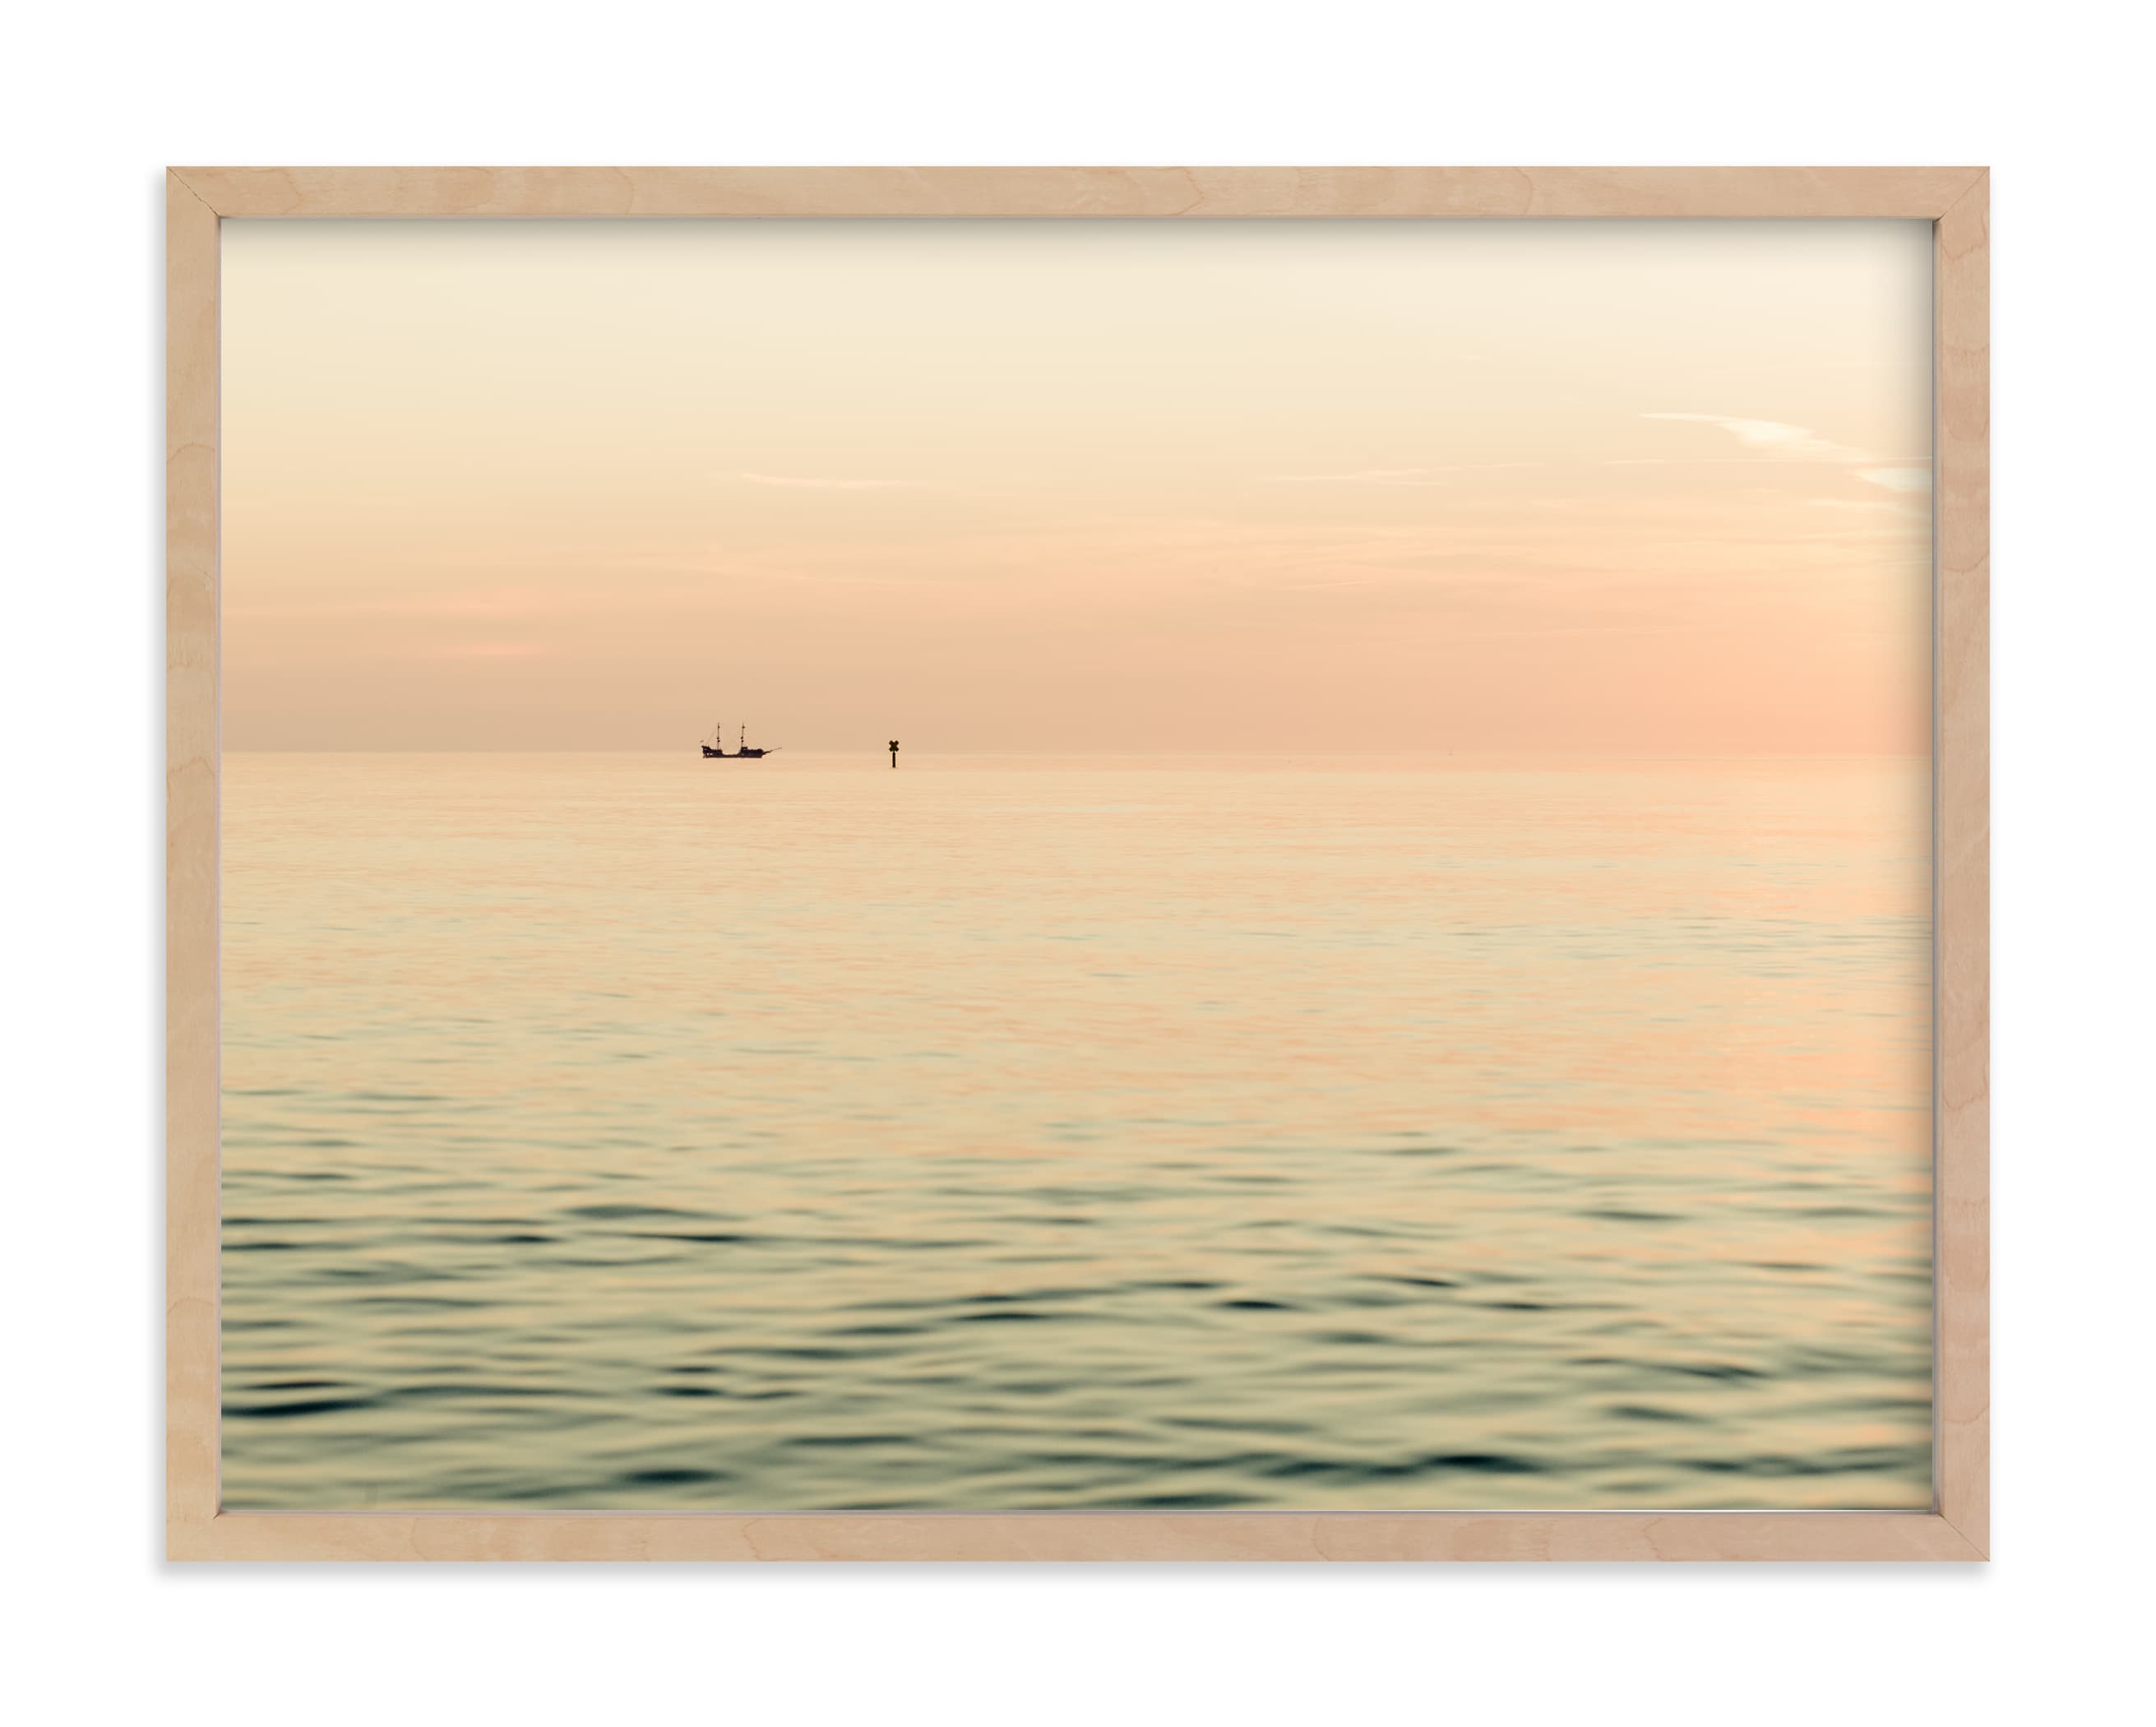 "Alone at sea II" by Lying on the grass in beautiful frame options and a variety of sizes.